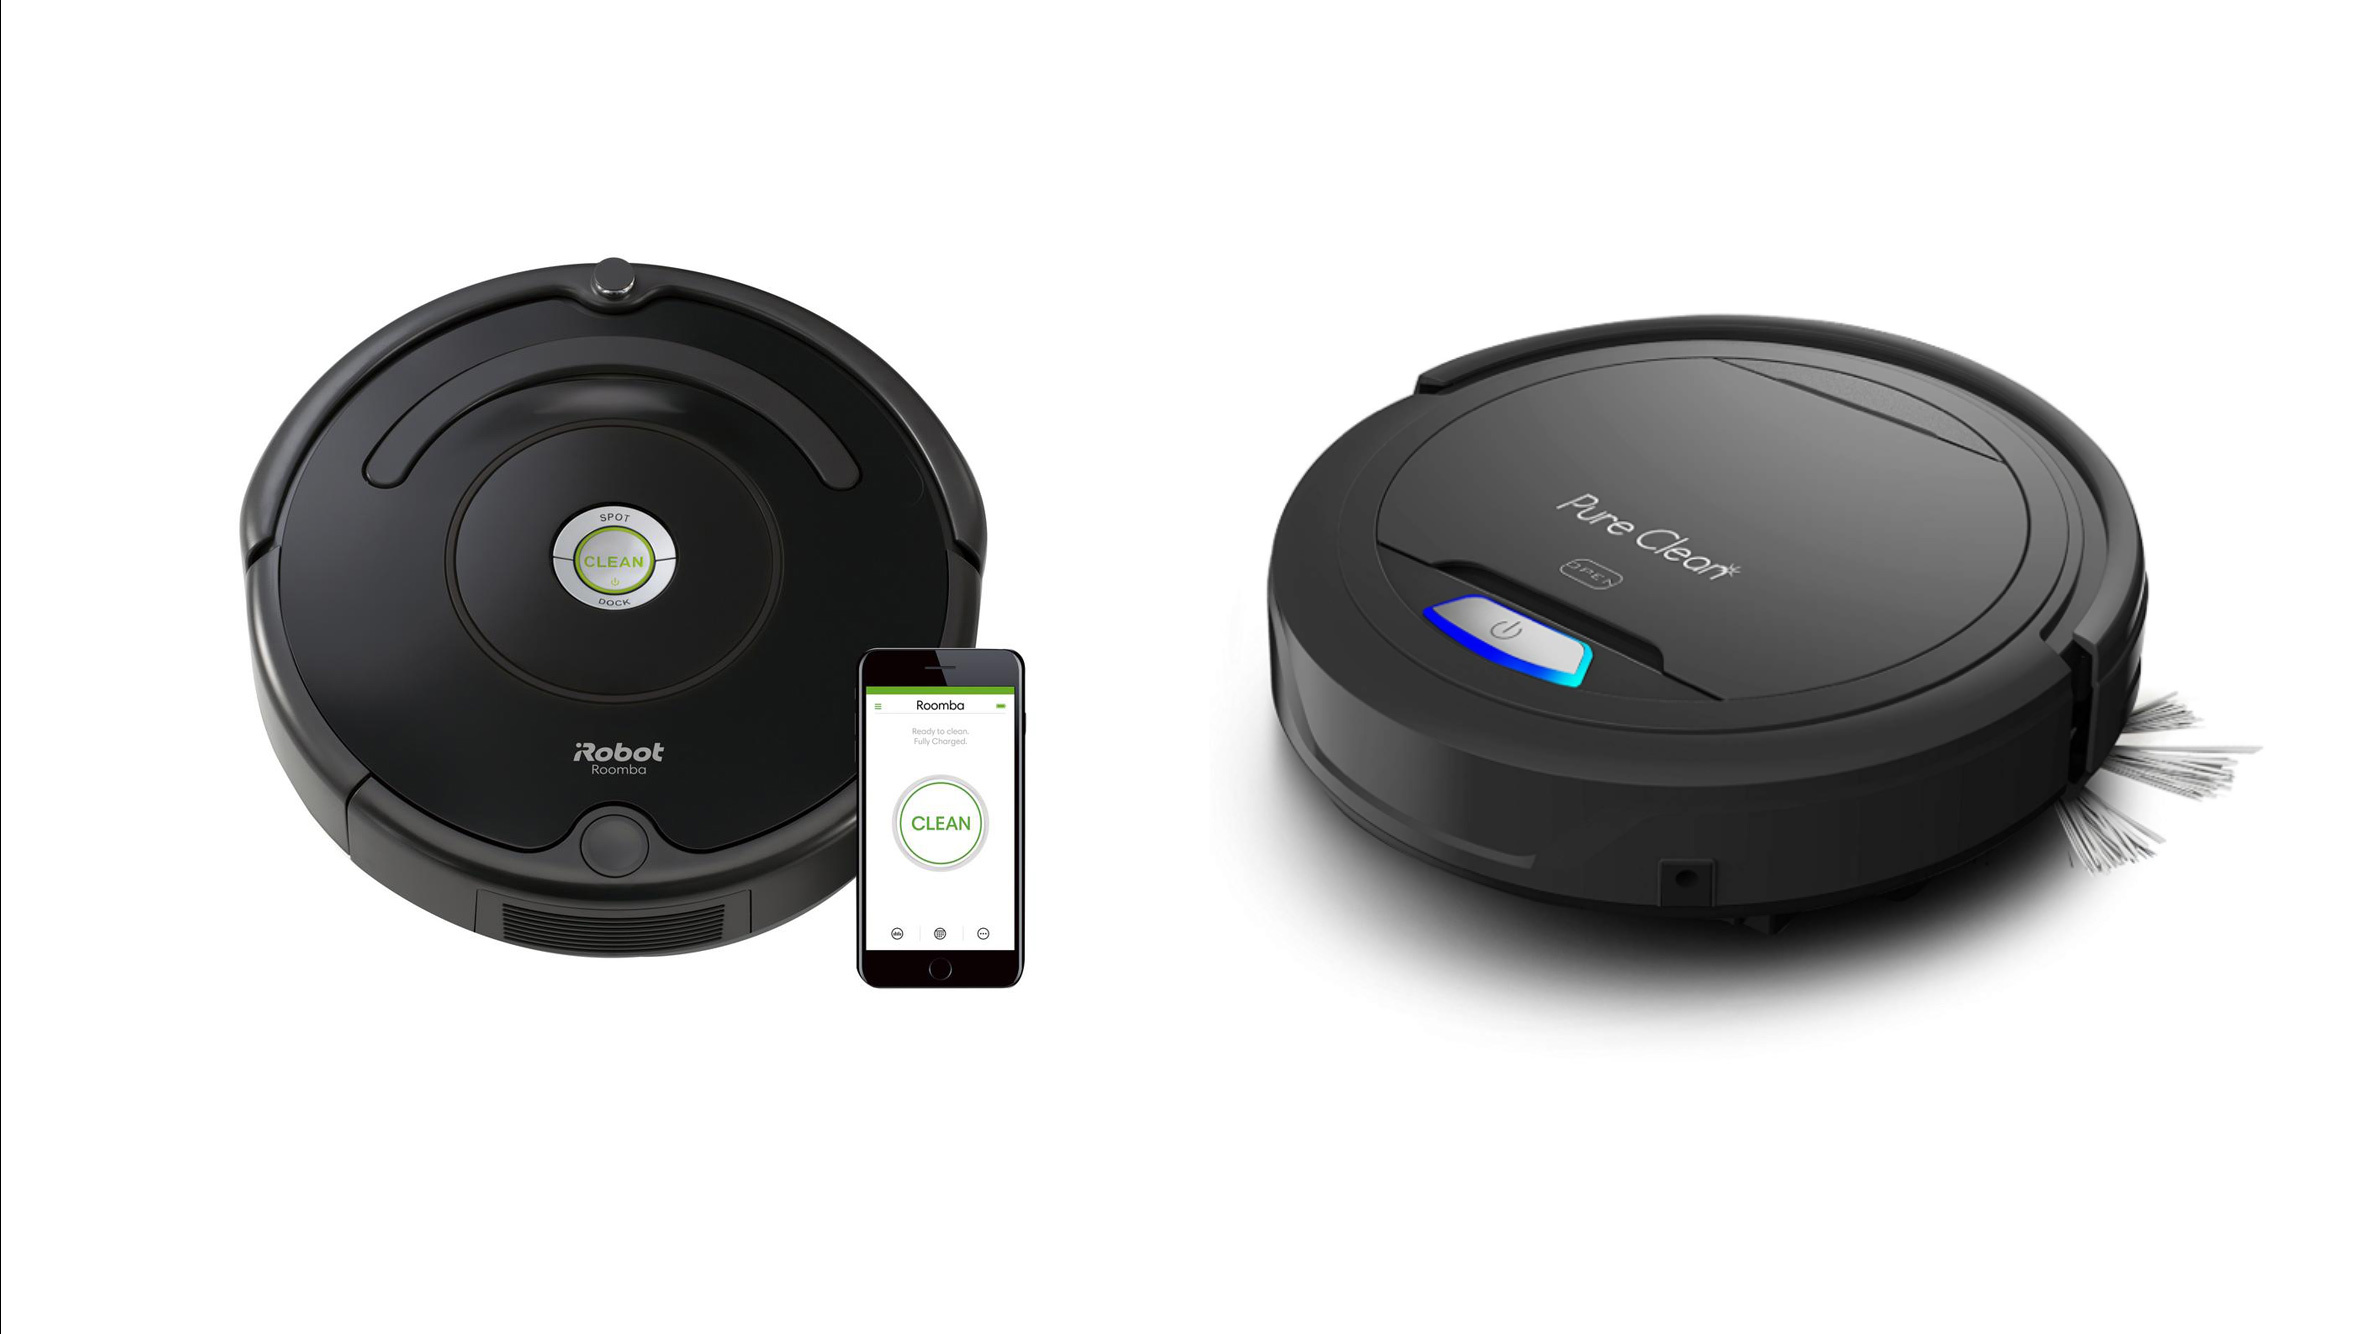 Why is the Roomba so expensive? Why are the knock-offs so…